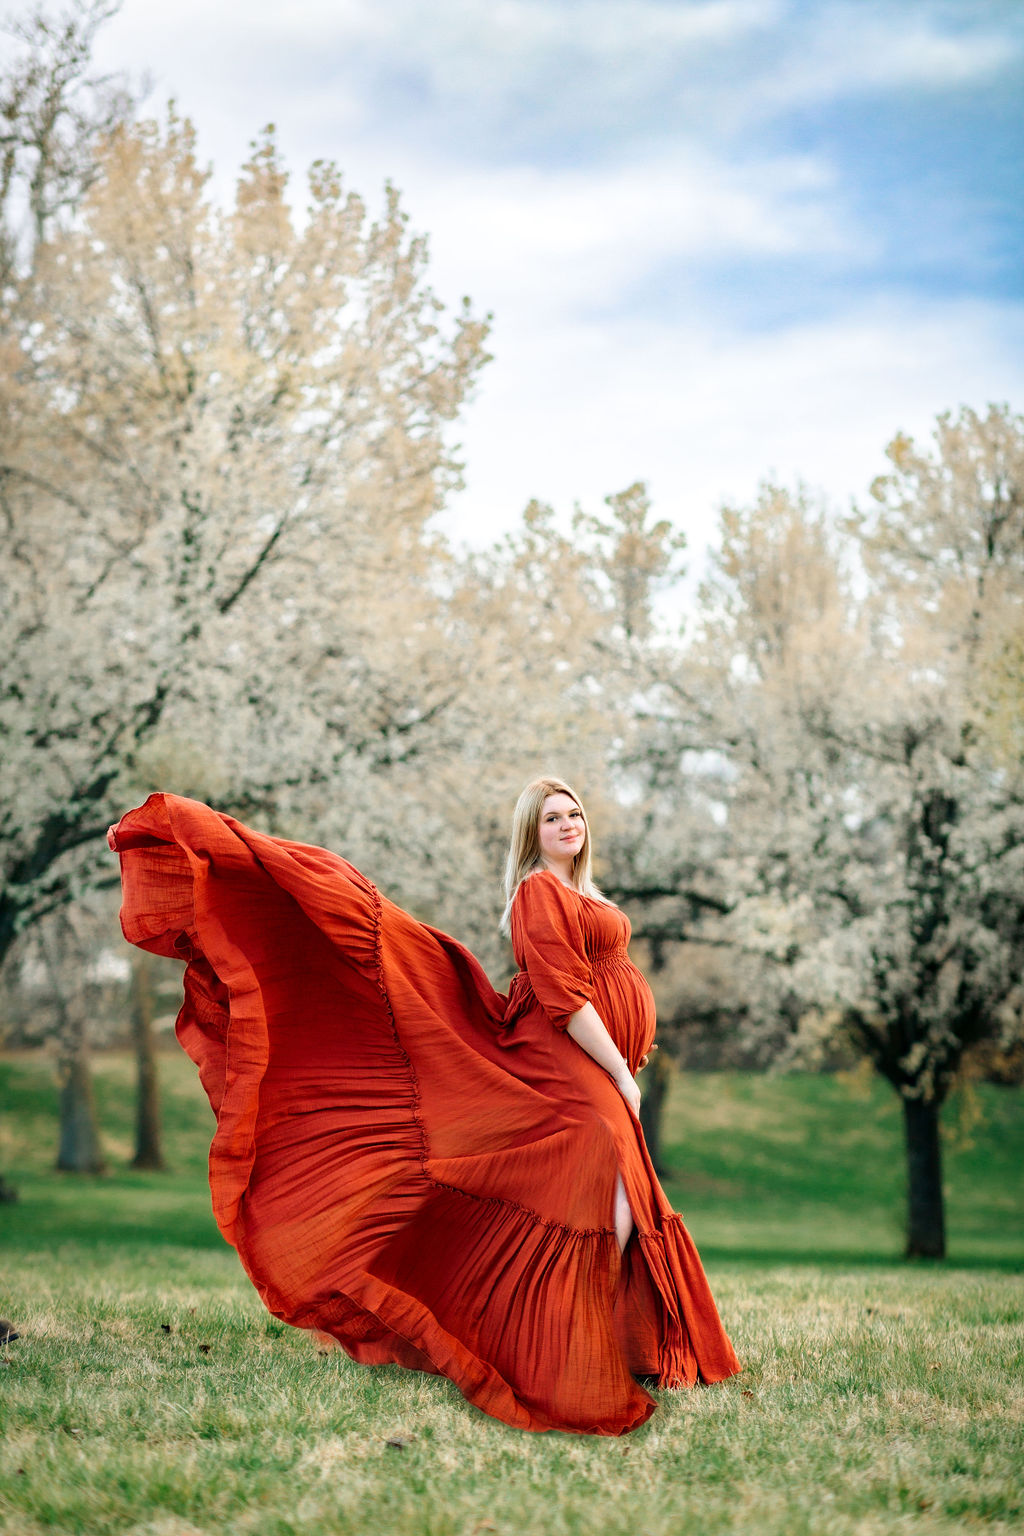 A mom to be stands among a group of flowering trees in a bright red maternity gown that is flowing in thee wind behind her babymoon destinations virginia